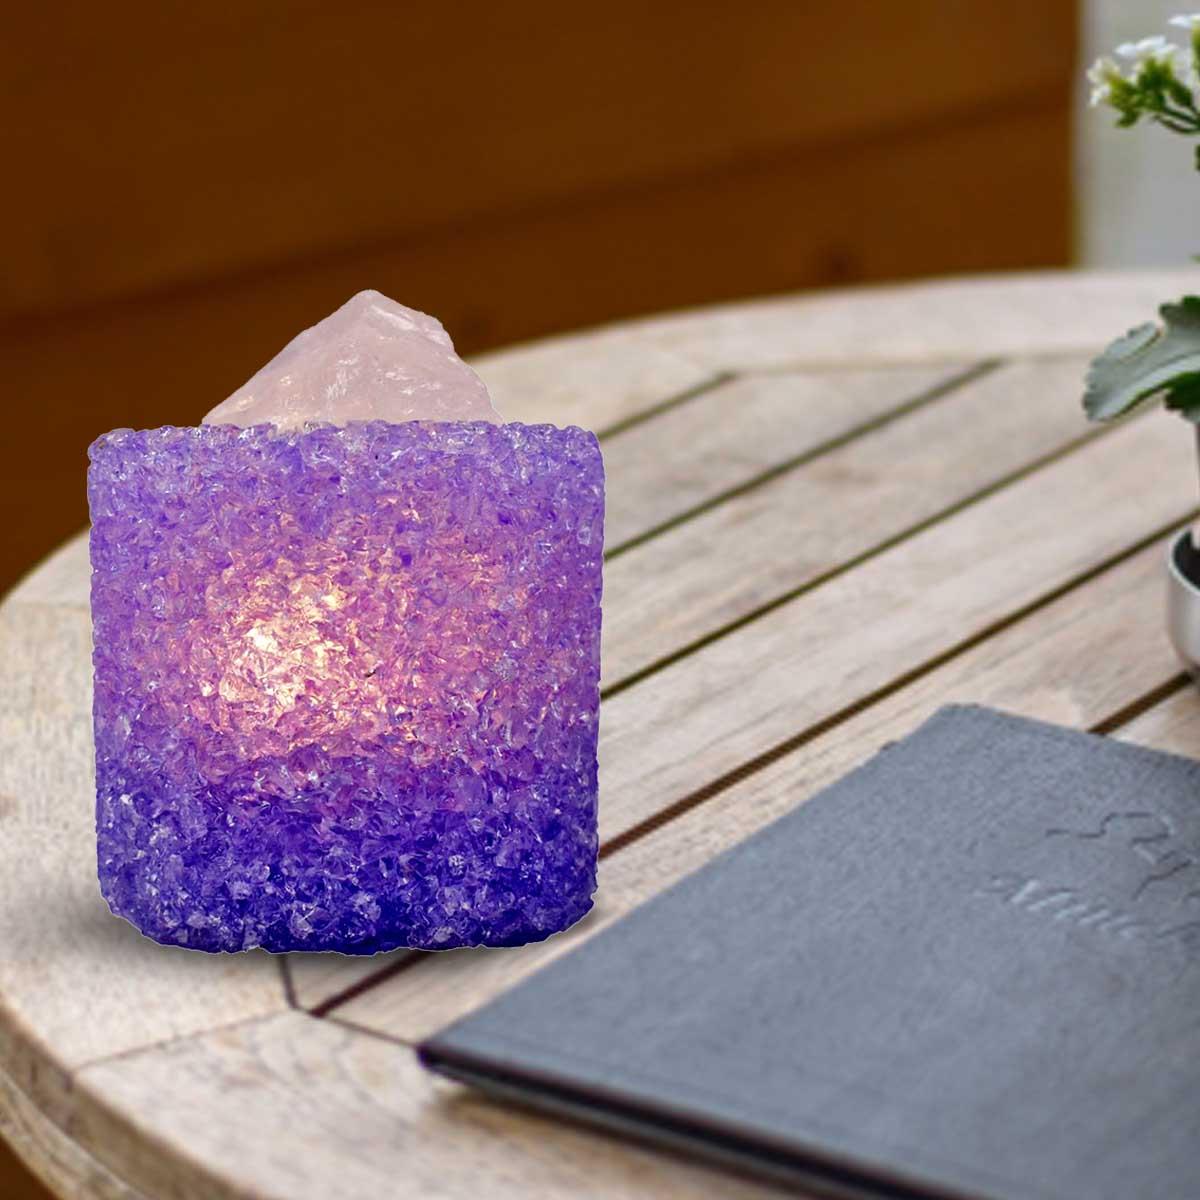 Kookee Natural Crystal Aromatherapy with Essential Oil, Electric Diffuser and LED Light Suitable for Home, Office, Spa for Claming, Soothing and Relaxing (087-7-B)